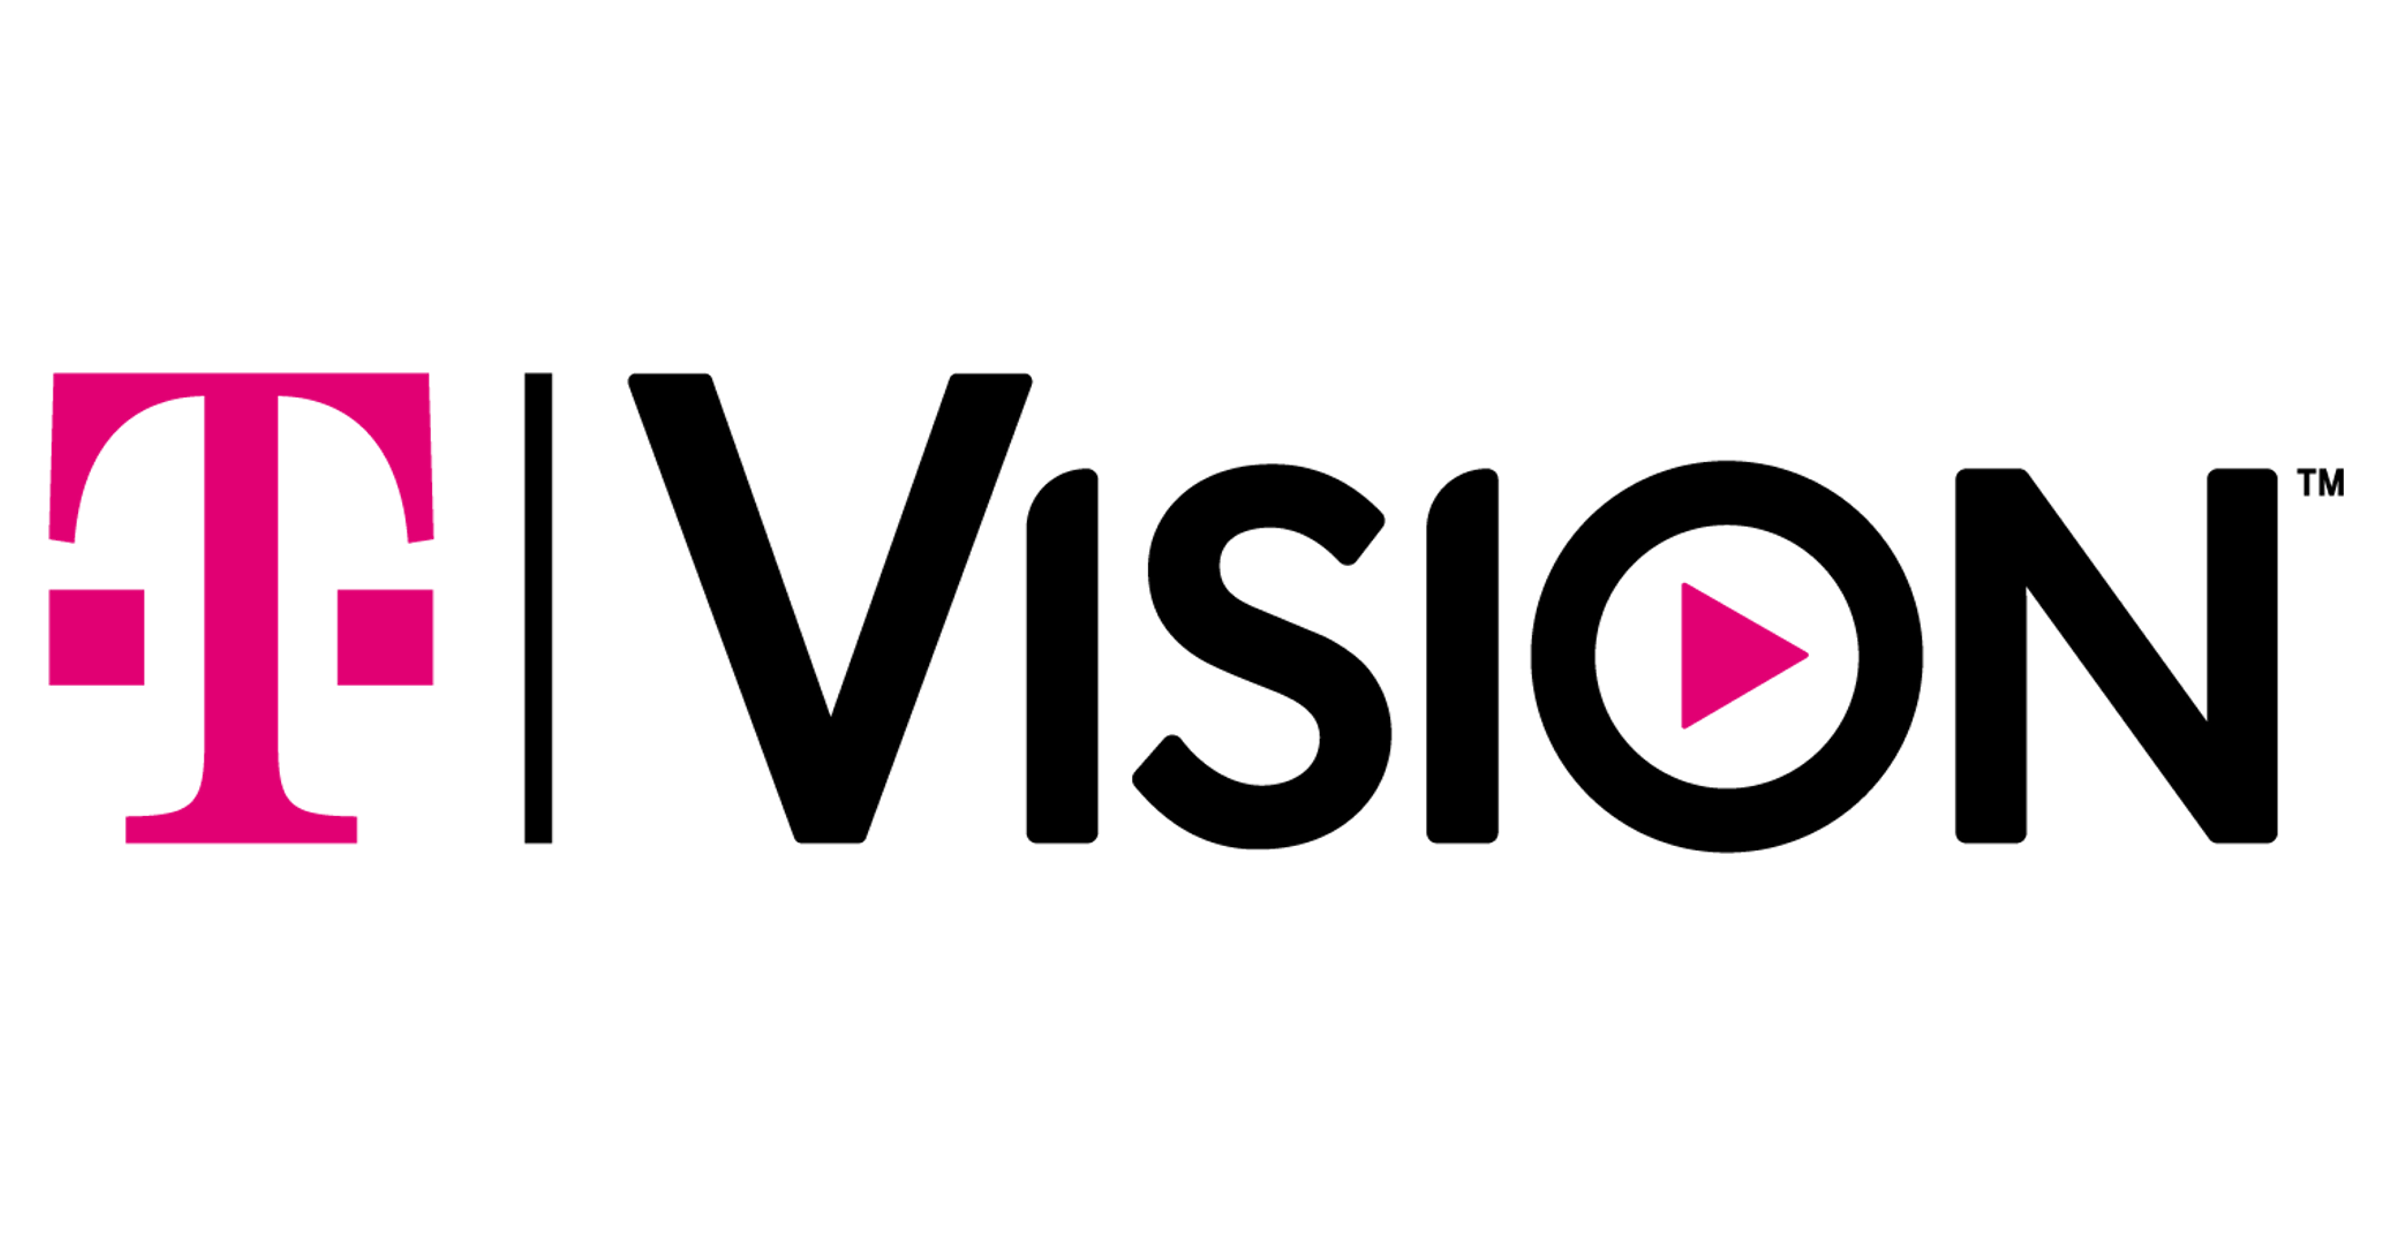 TVision from T-Mobile logo